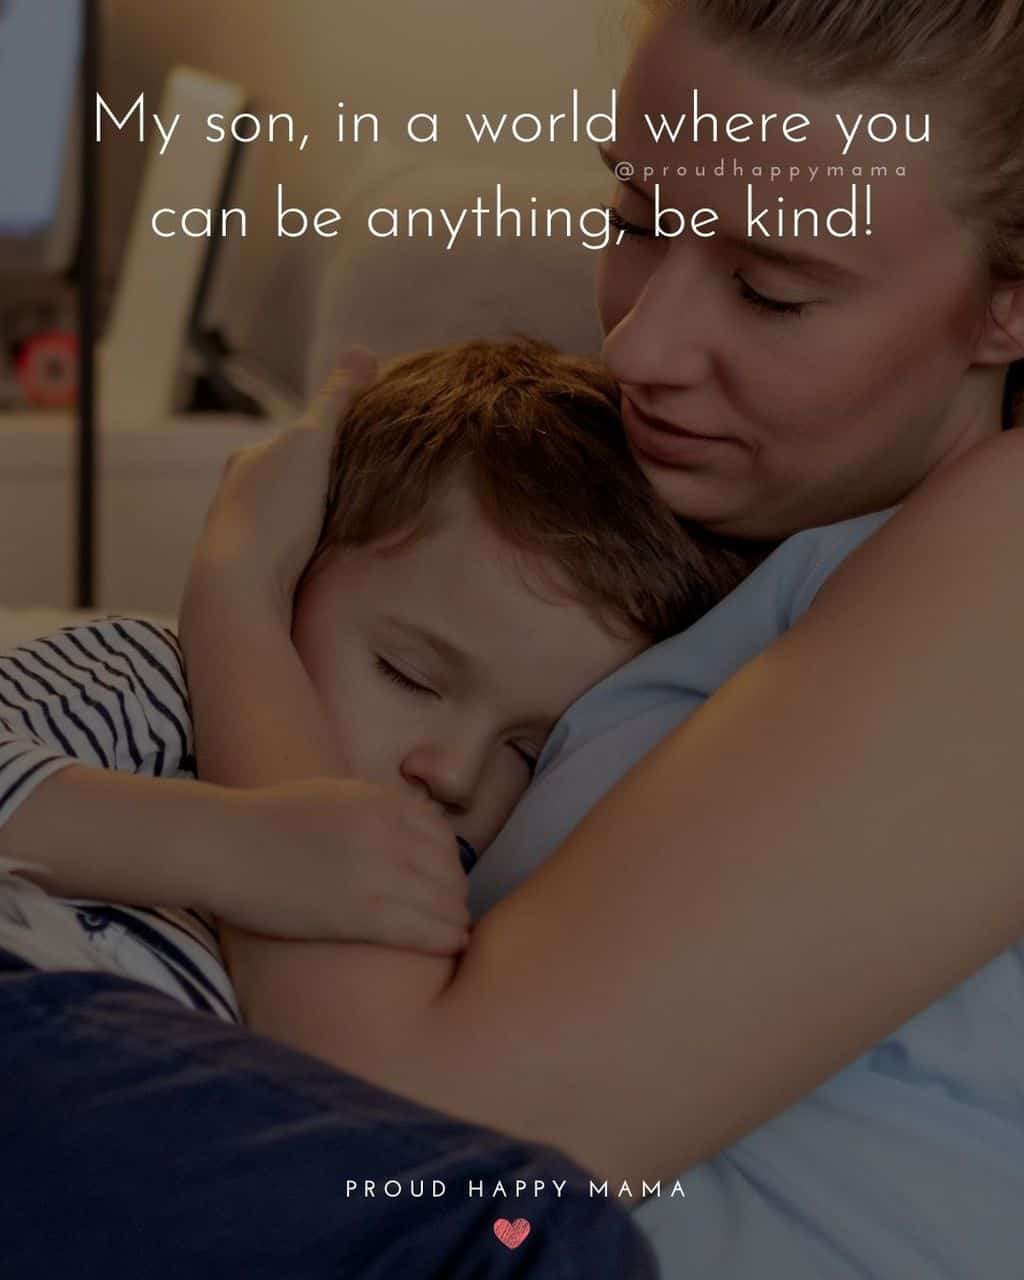 Son Quotes - My son, in a world where you can be anything, be kind!’